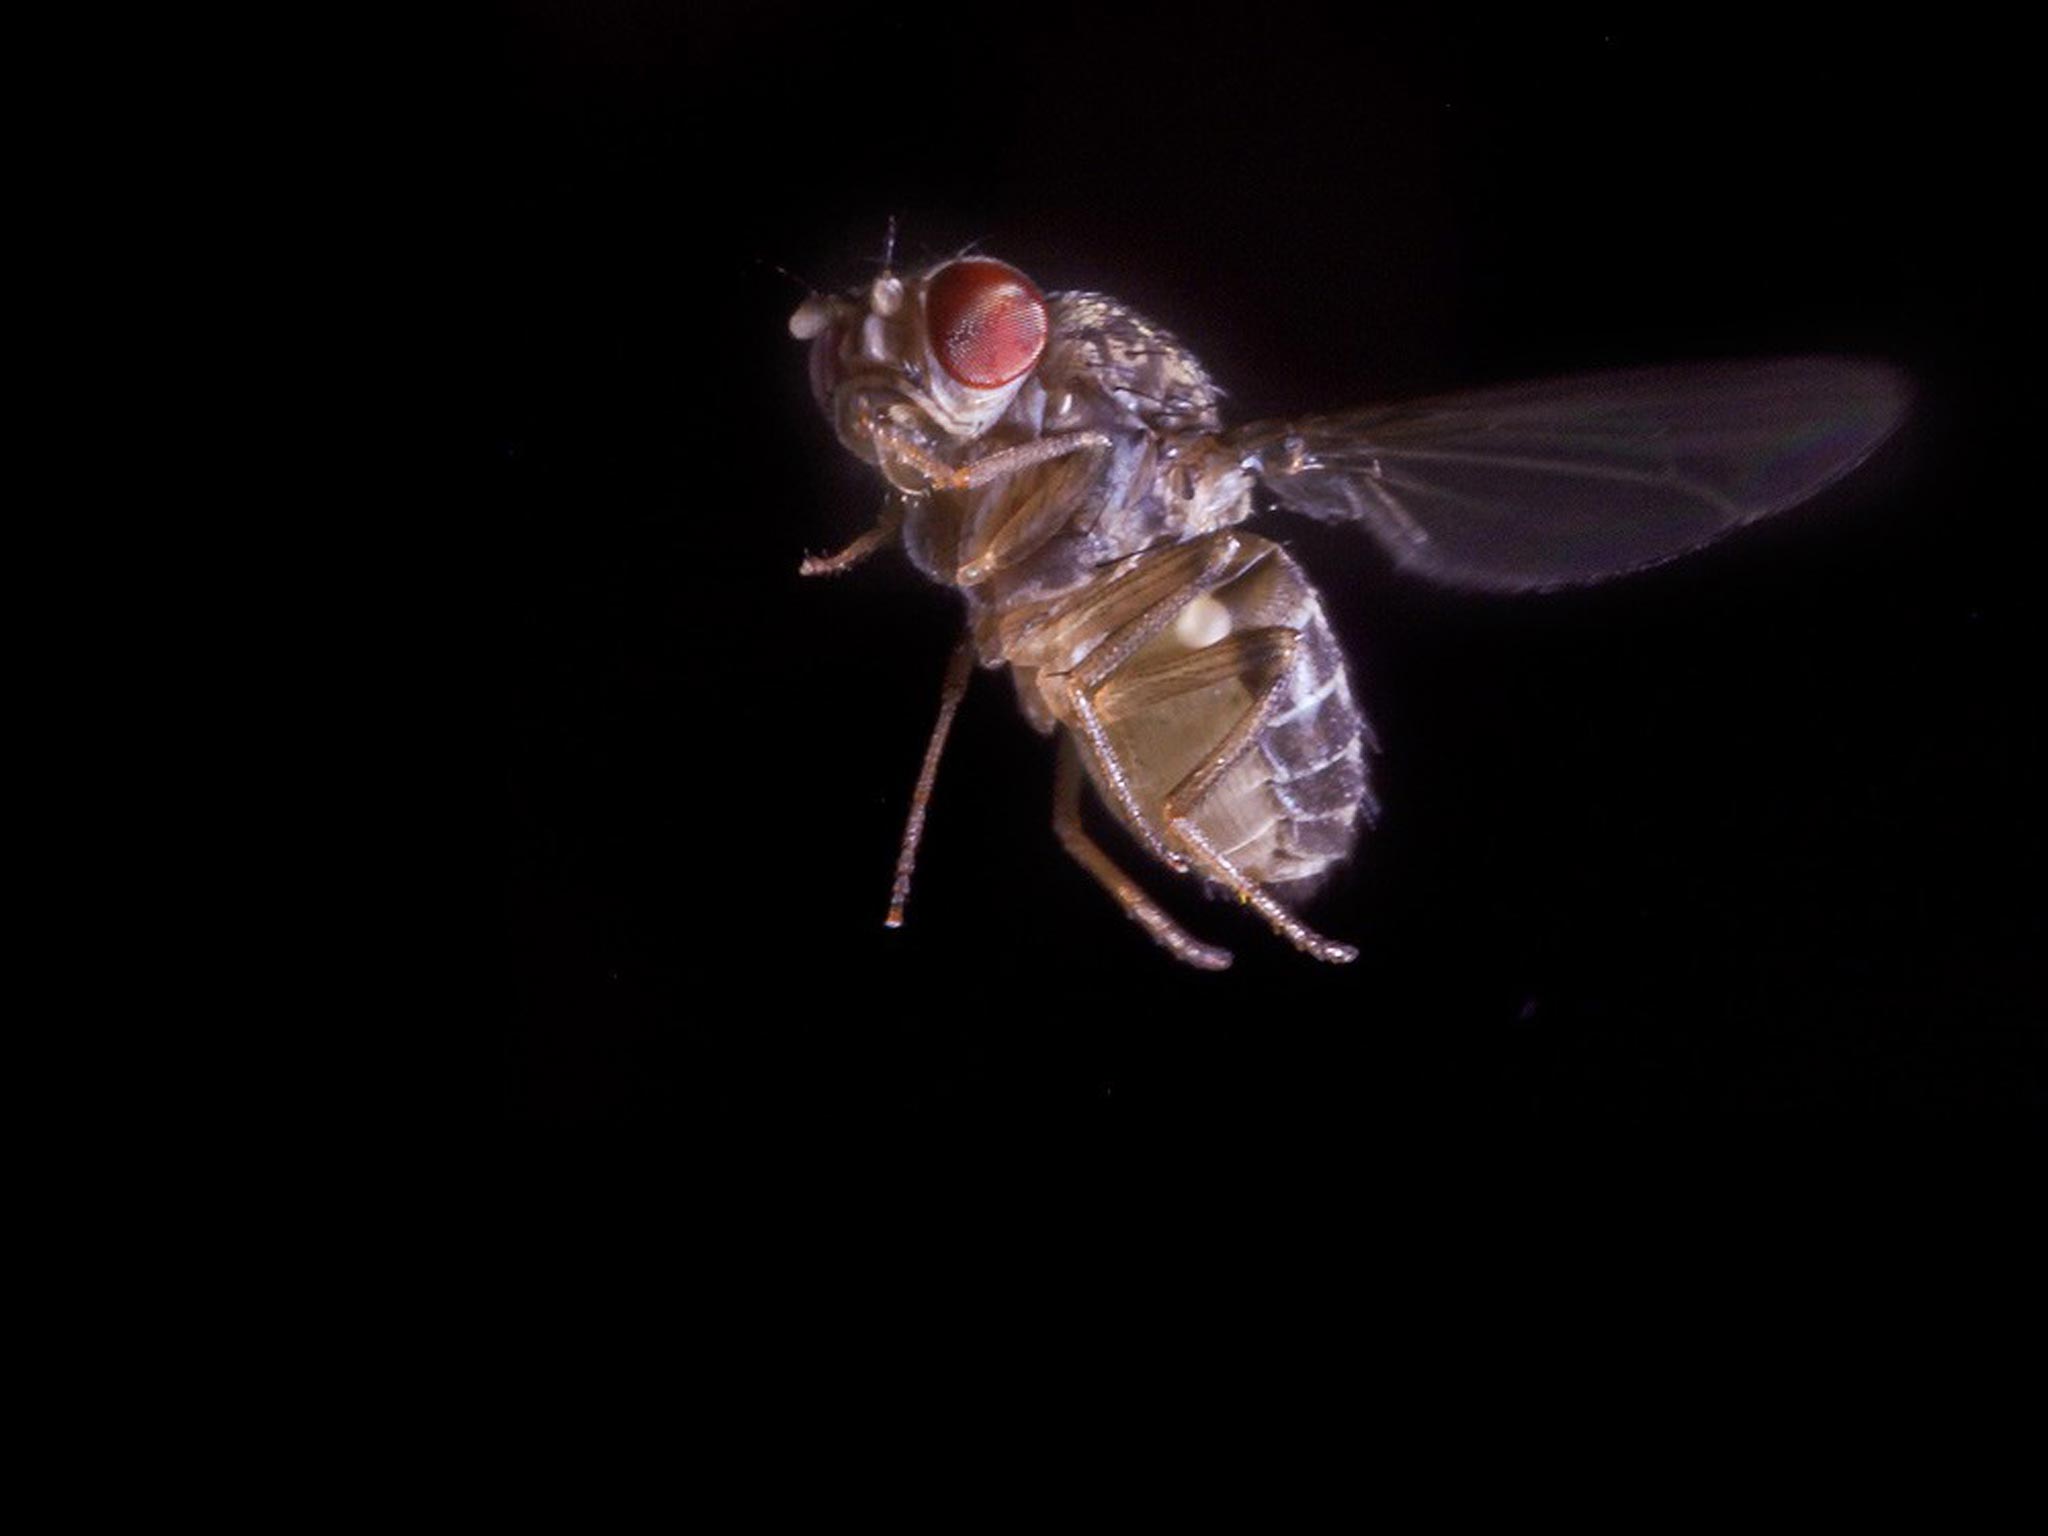 The fruit fly, Drosophila hydei, which behaves like a fighter jet when trying to escape a predator, scientists have found